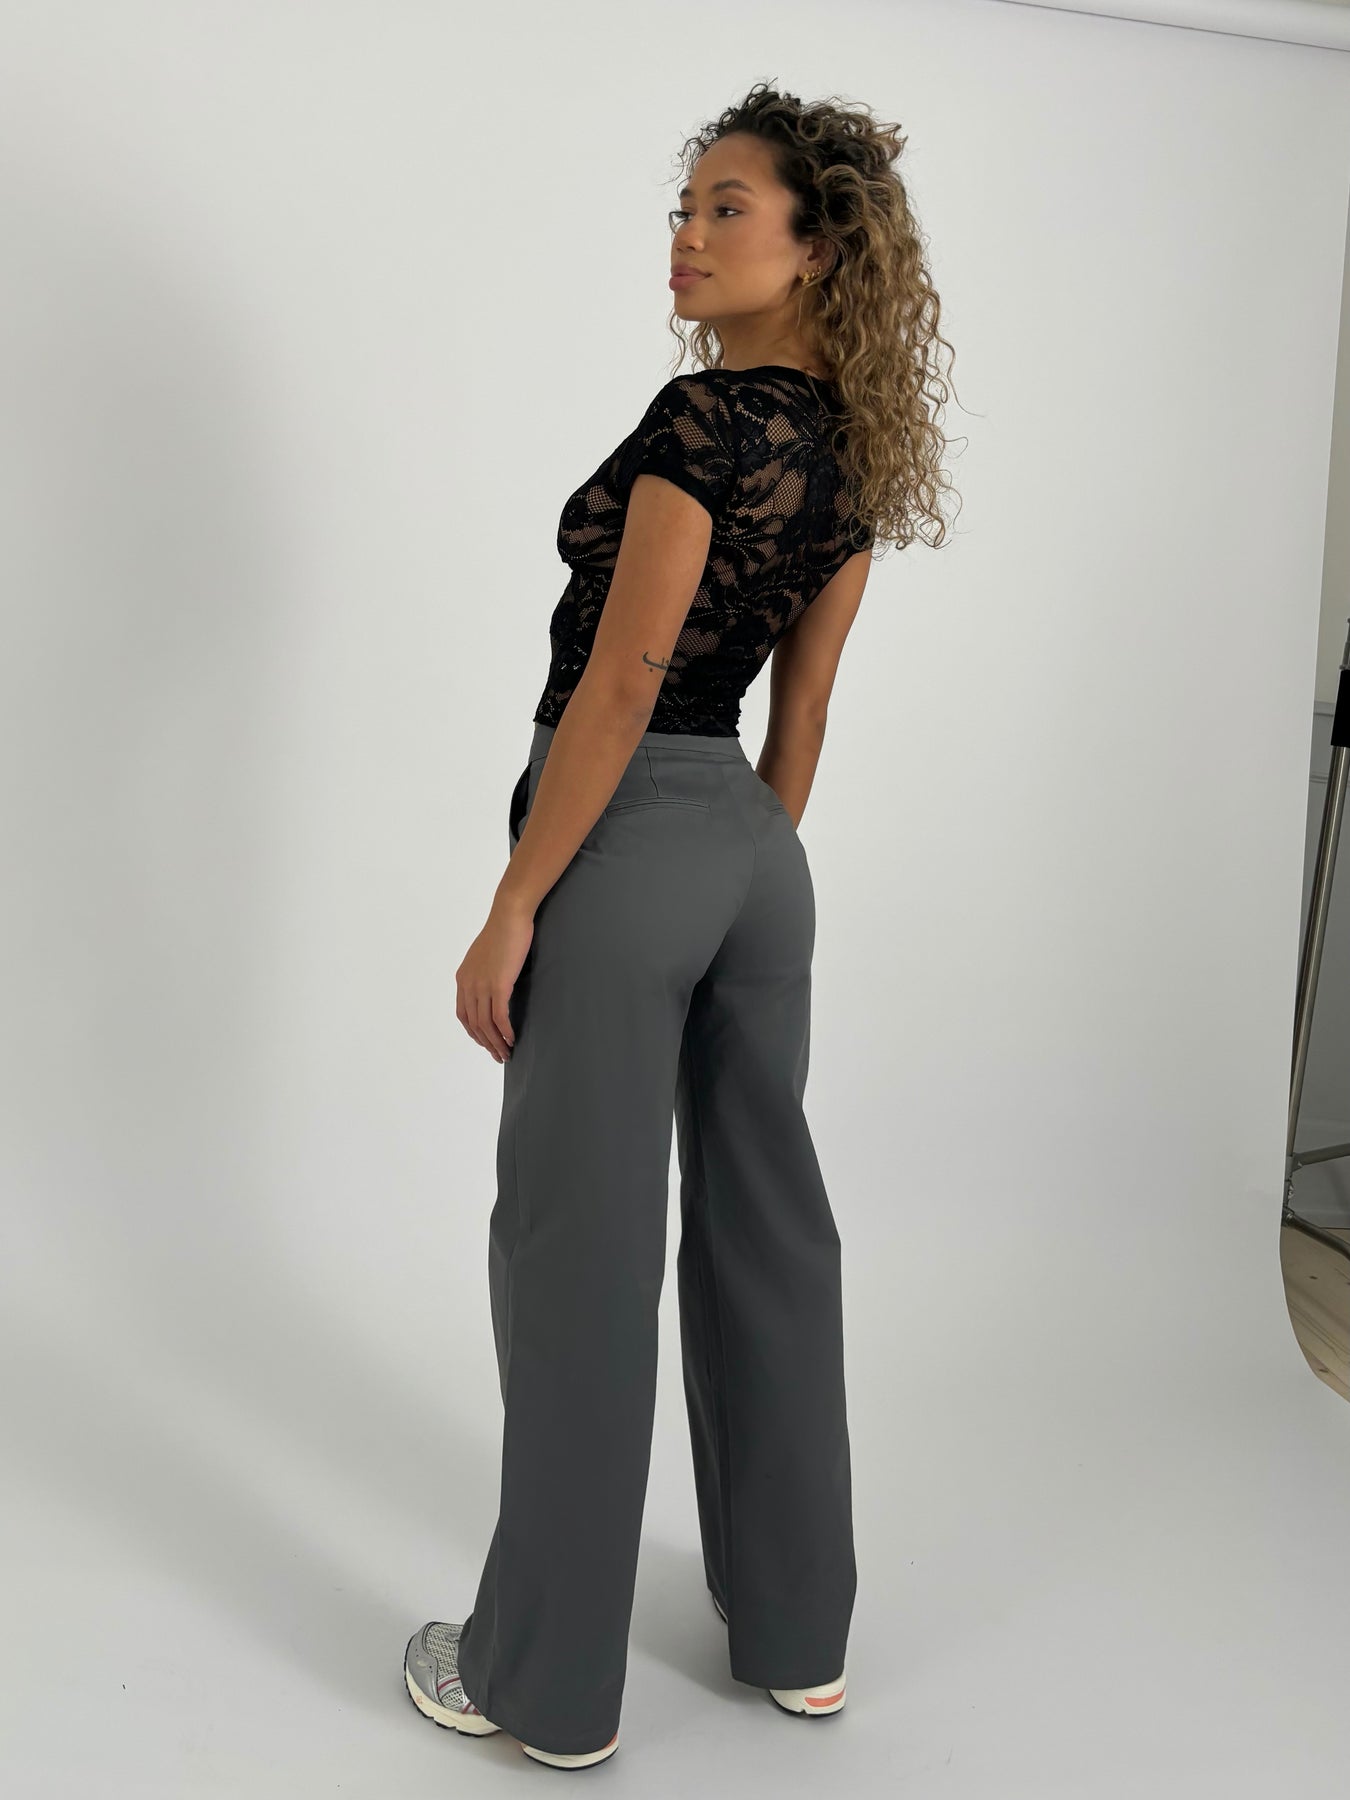 Long pants for tall women - in various colors - VENDERBY's